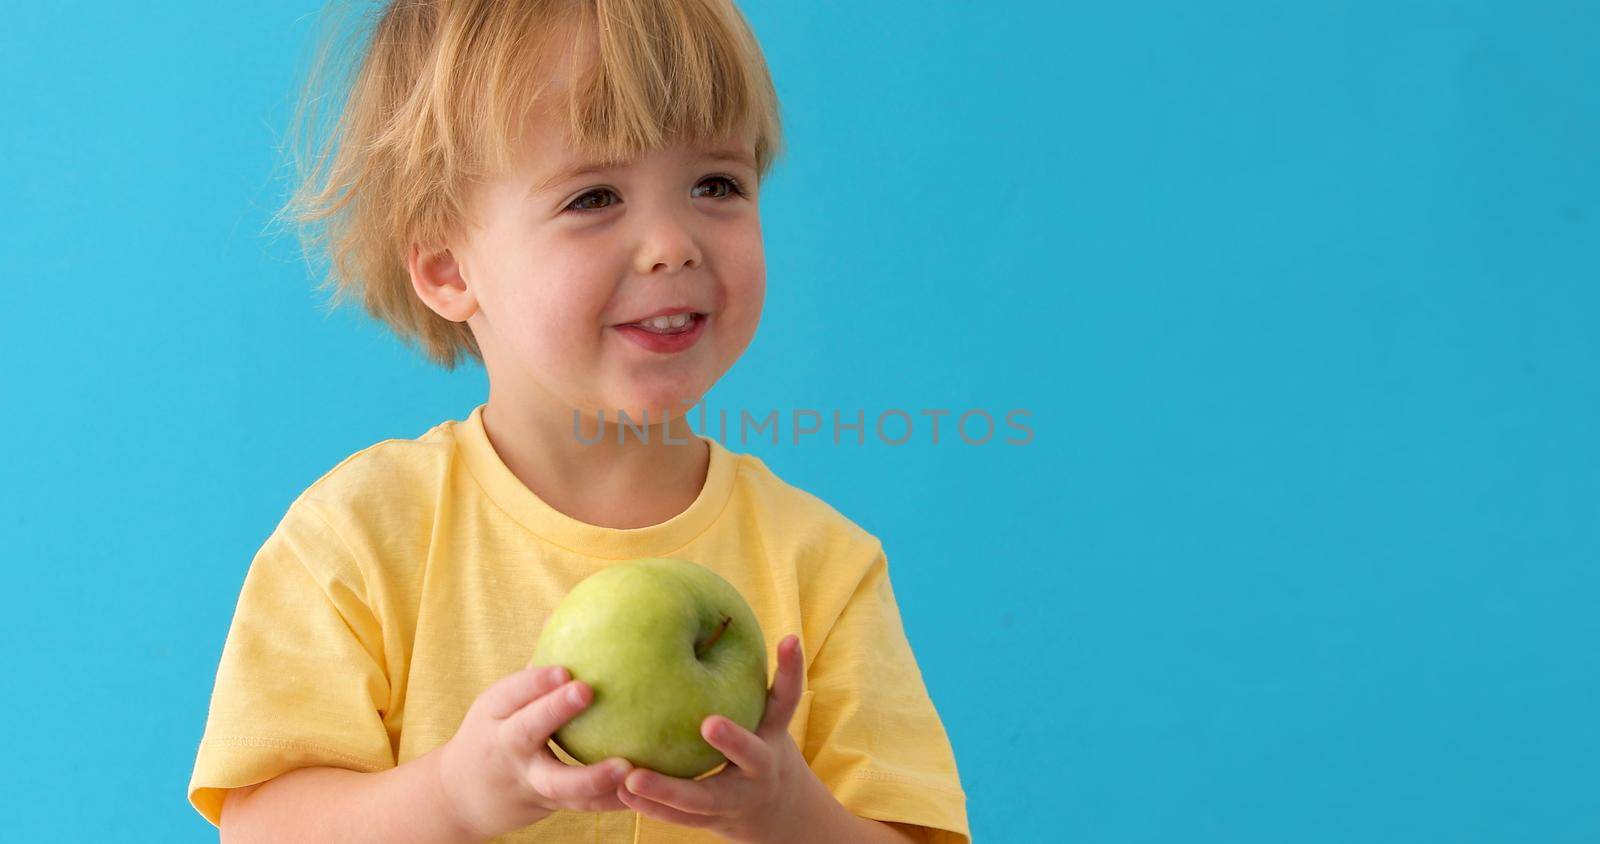 small boy holds a big green apple, healthy food and vitamins, smiling, blue background